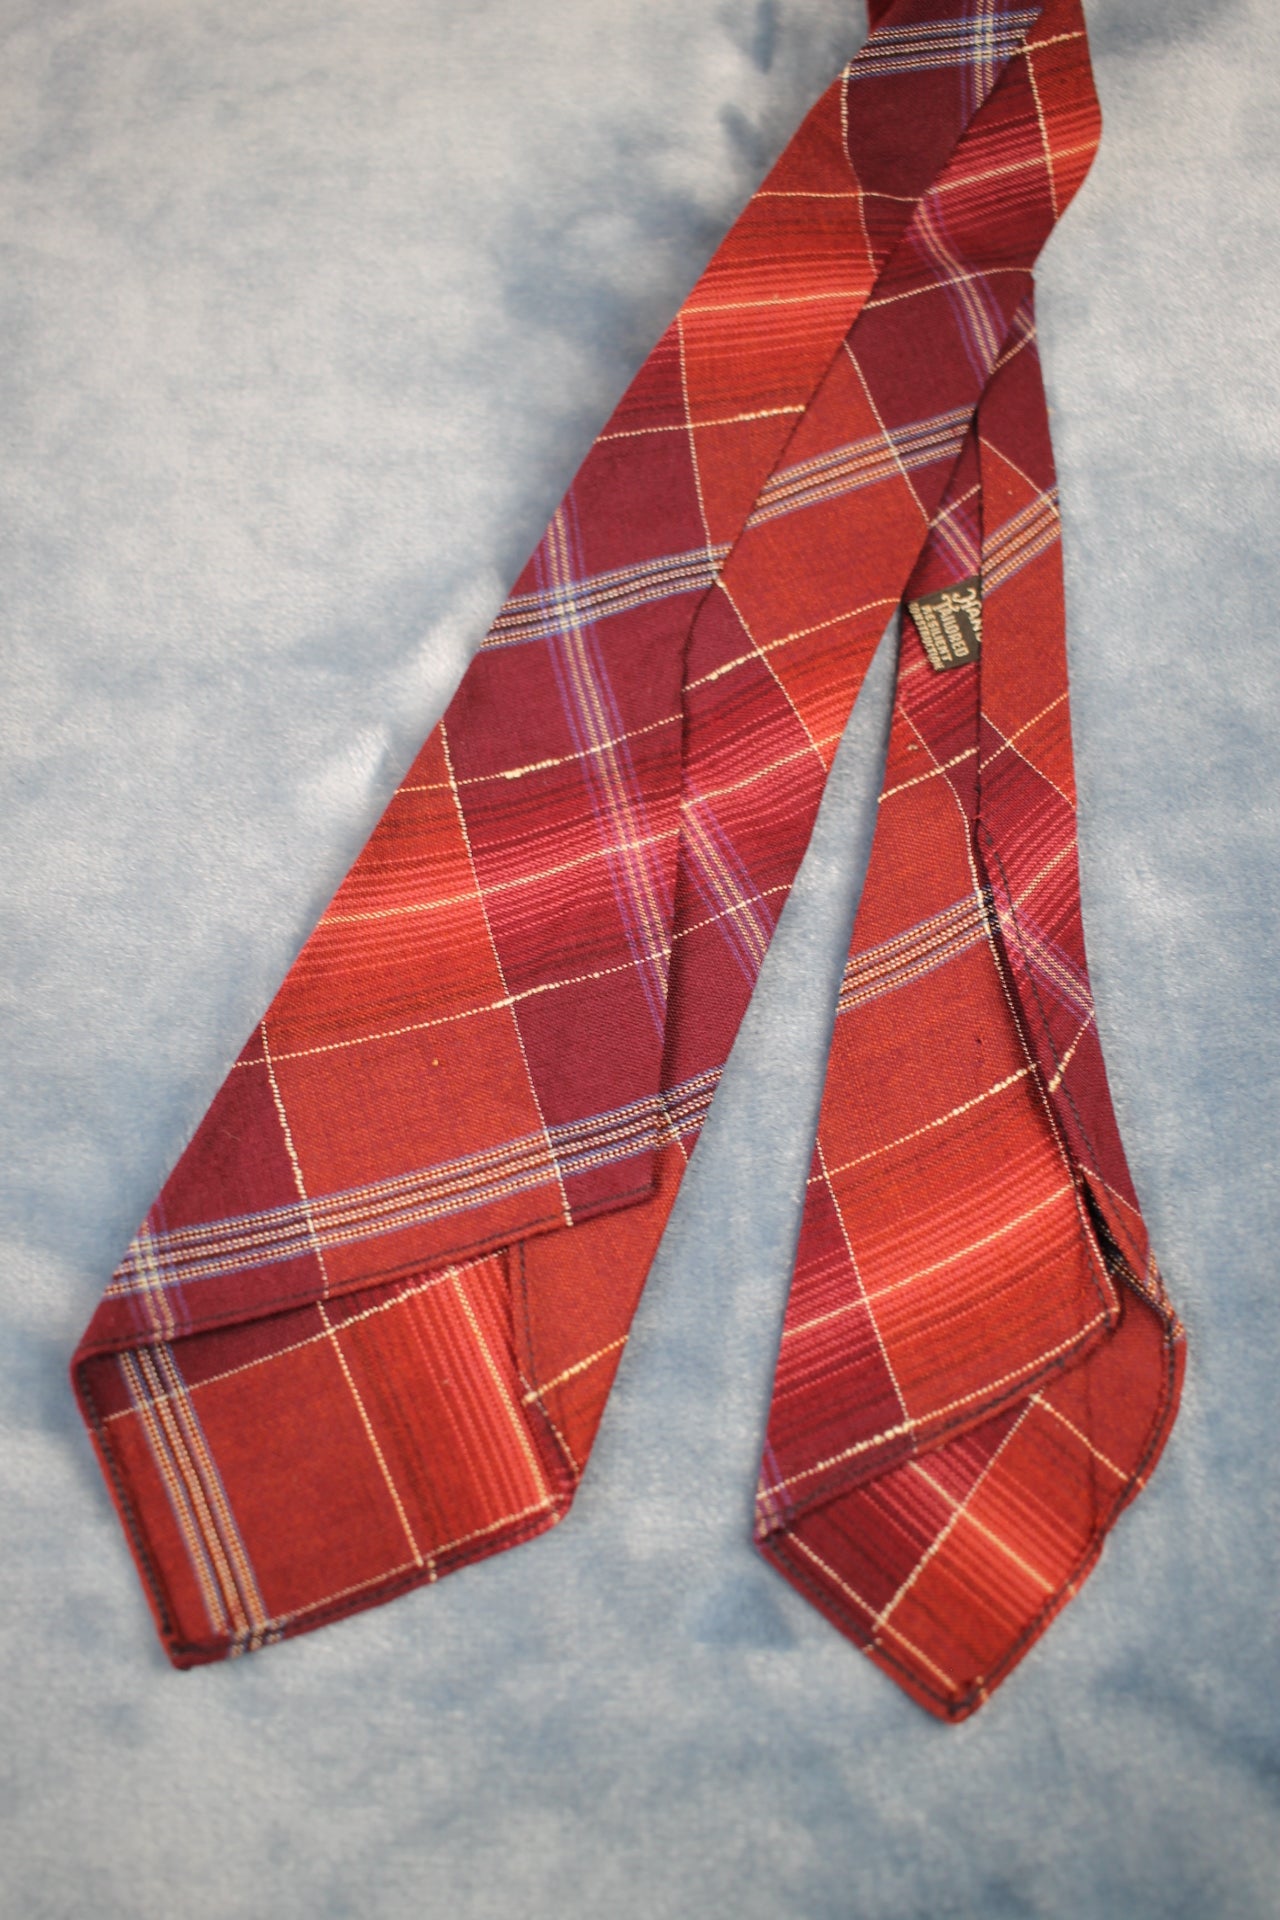 Vintage hand tailored 1940s/50s red purple check swing tie